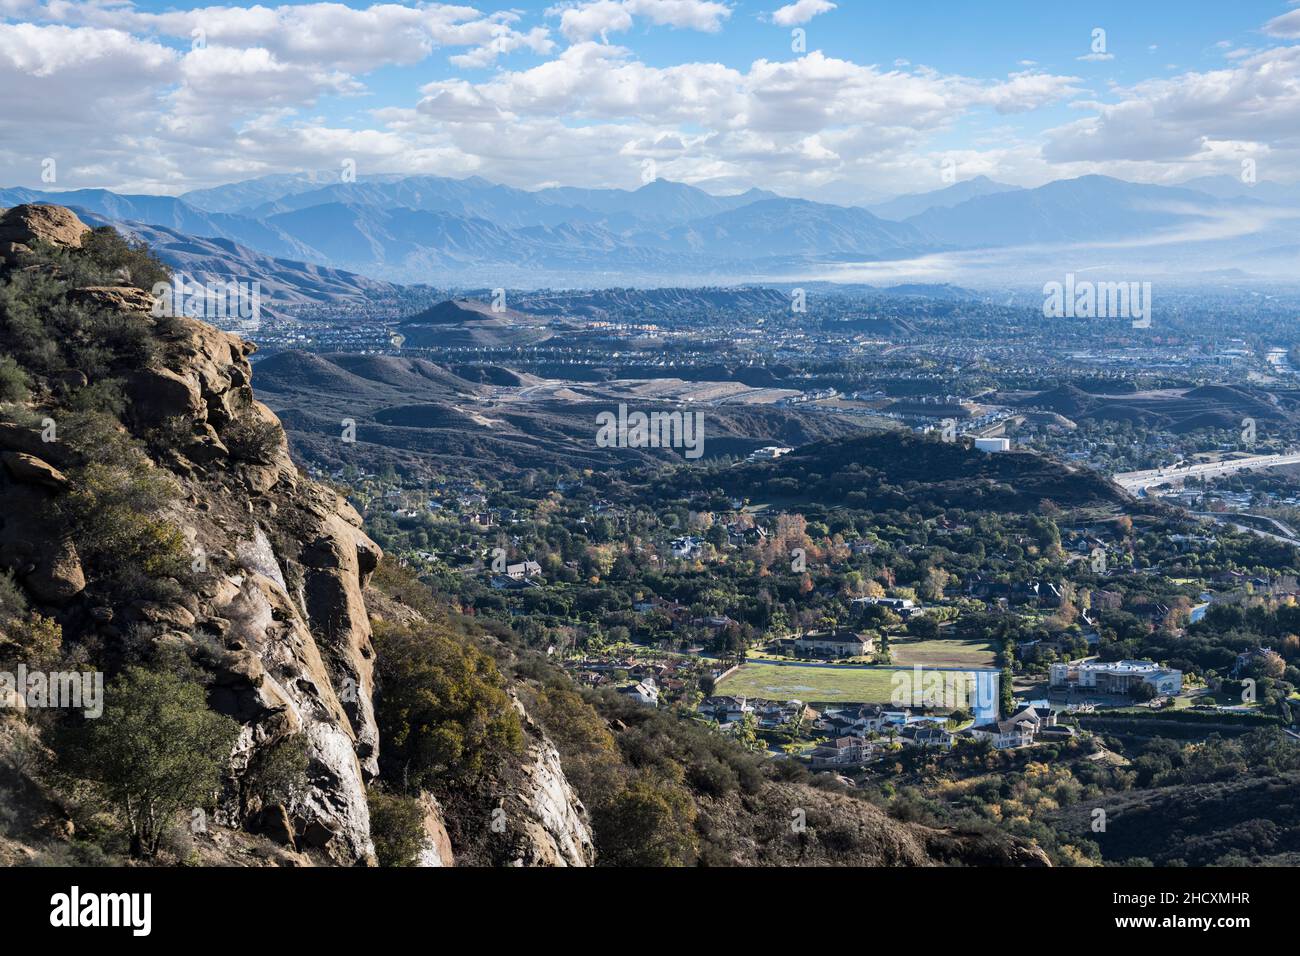 Morning mountain view of the Porter Ranch neighborhood in the San Fernando Valley area of Los Angeles, California. Stock Photo